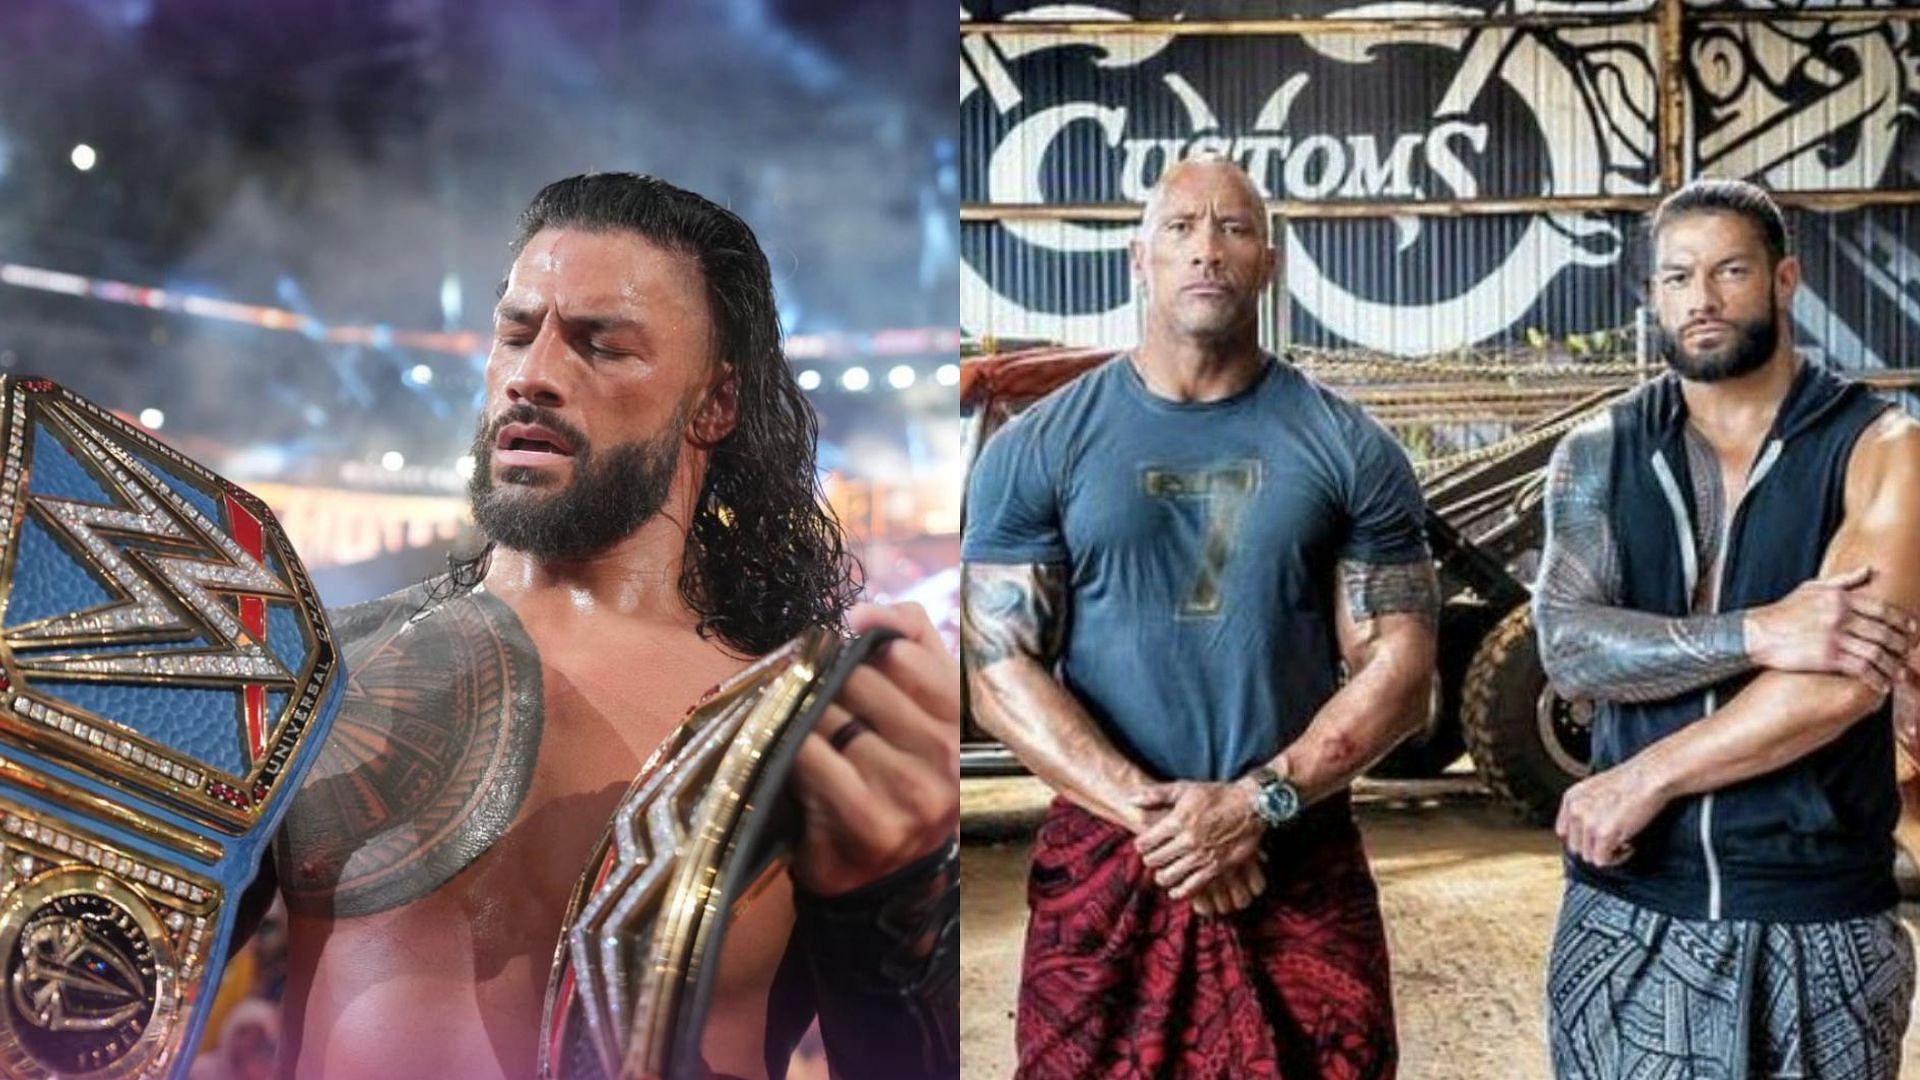 Roman Reigns has starred in a few Hollywood movies